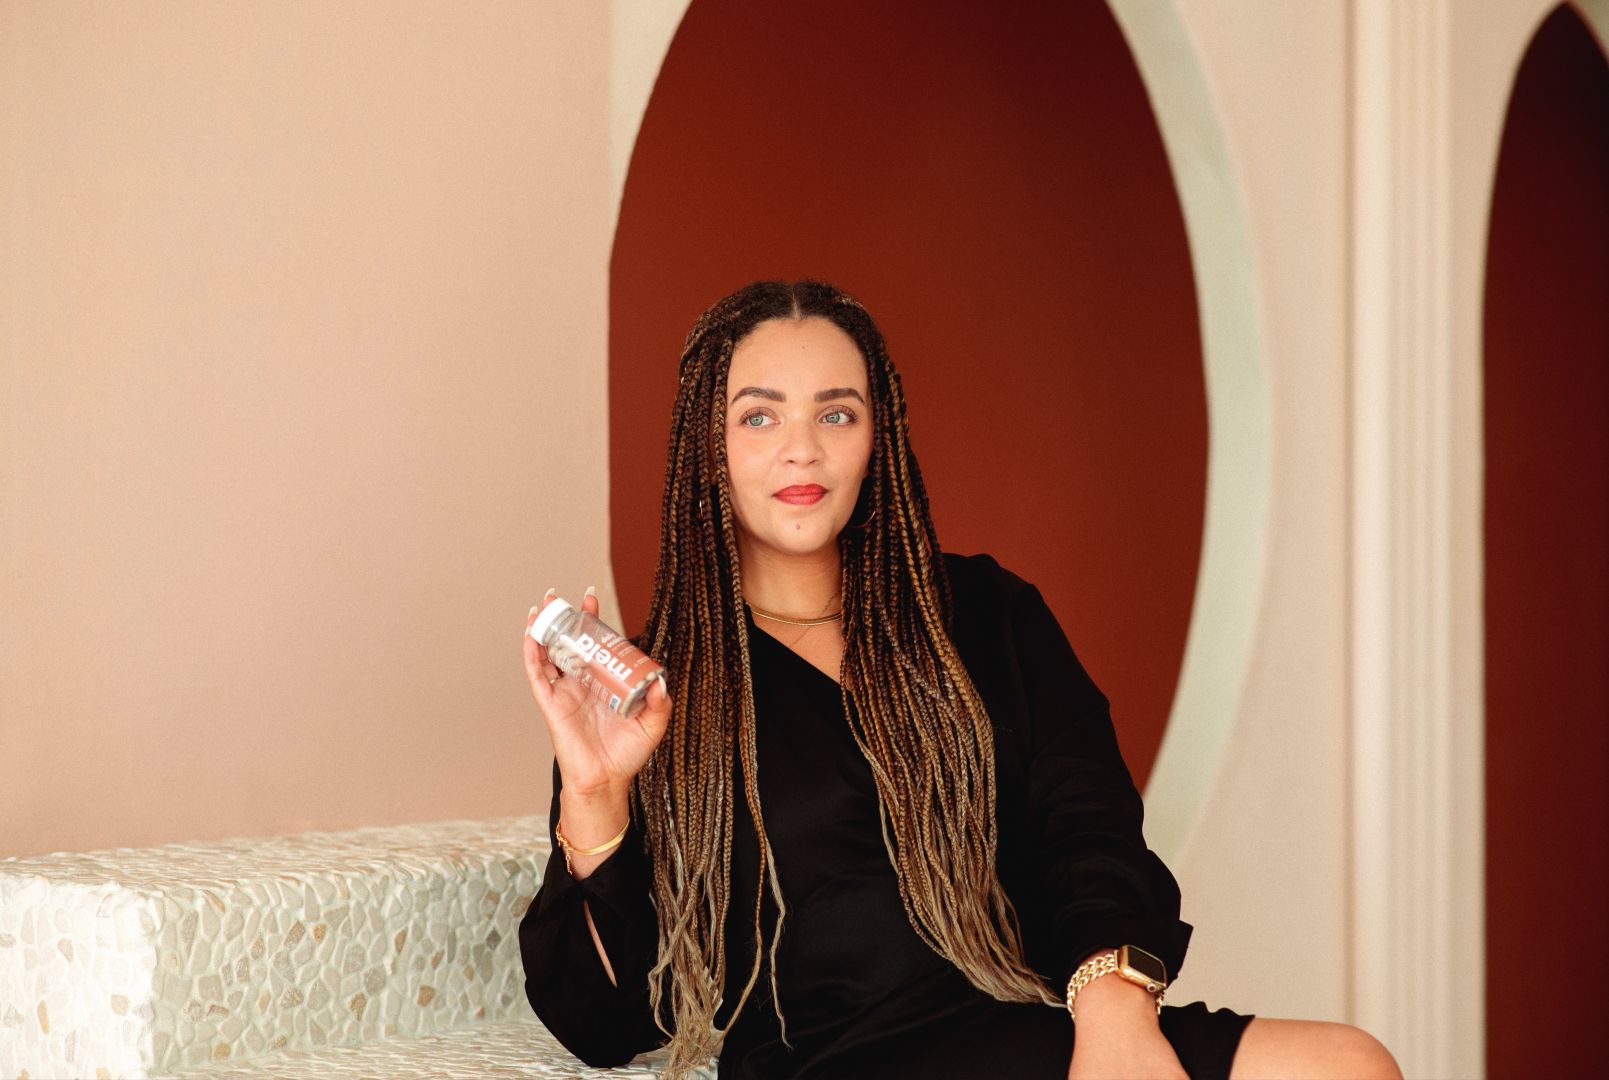 melavitamins is a daily essential vitamin for women of color by wome